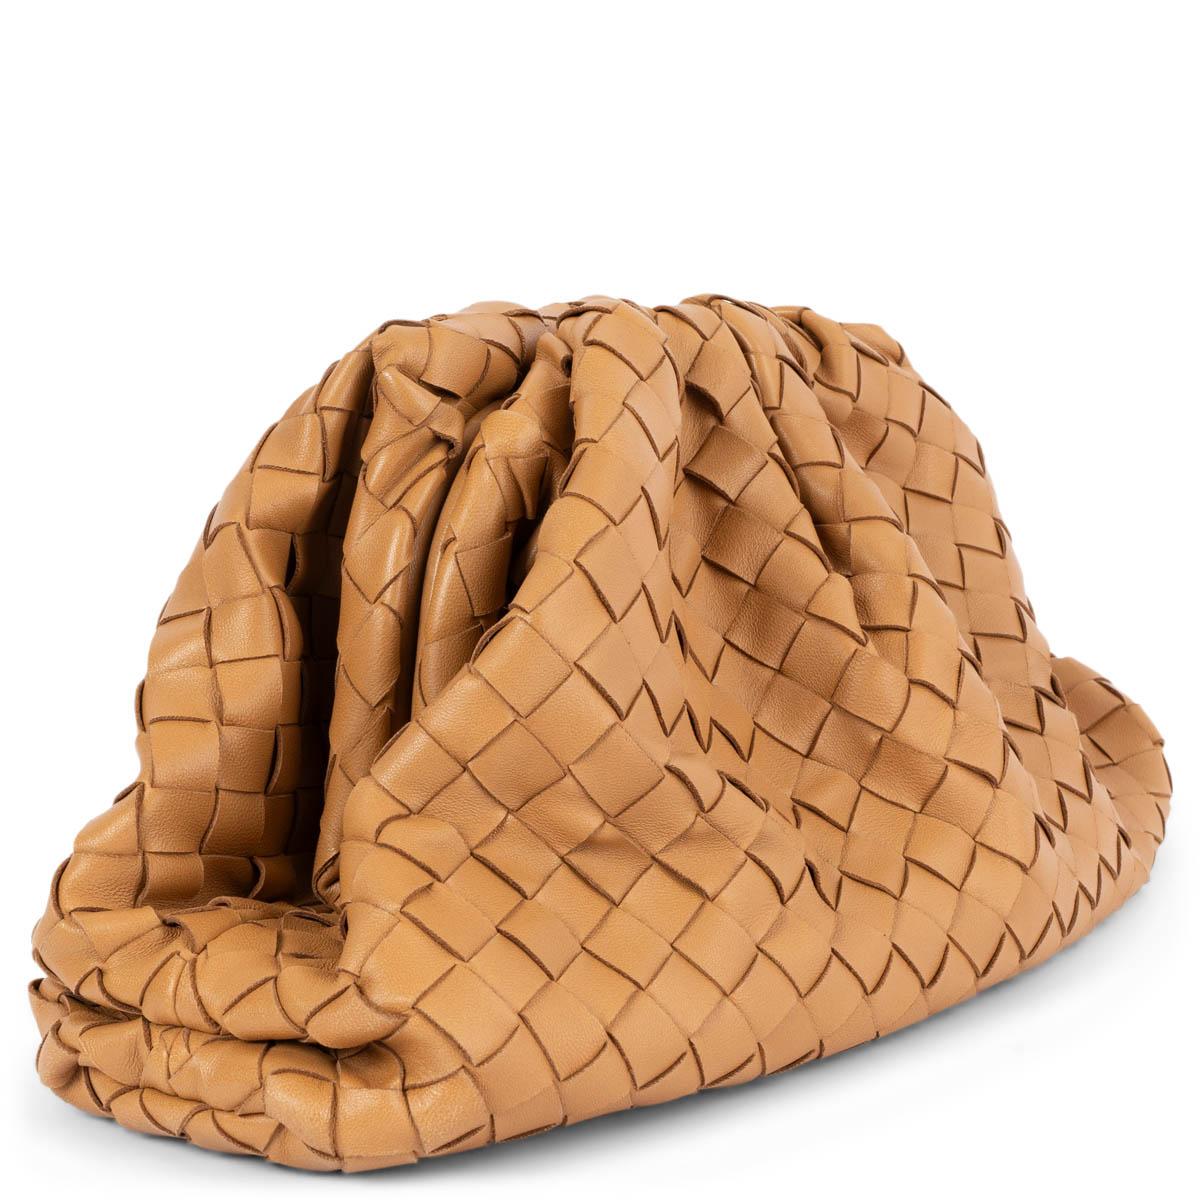 100% authentic Bottega Veneta Classic Pouch in camel Intrecciato woven calfskin. Opens with a magnetic frame closure and is lined in calfskin leather. Has been carried and is in excellent condition. Comes with dust bag. 

Measurements
Height	18cm